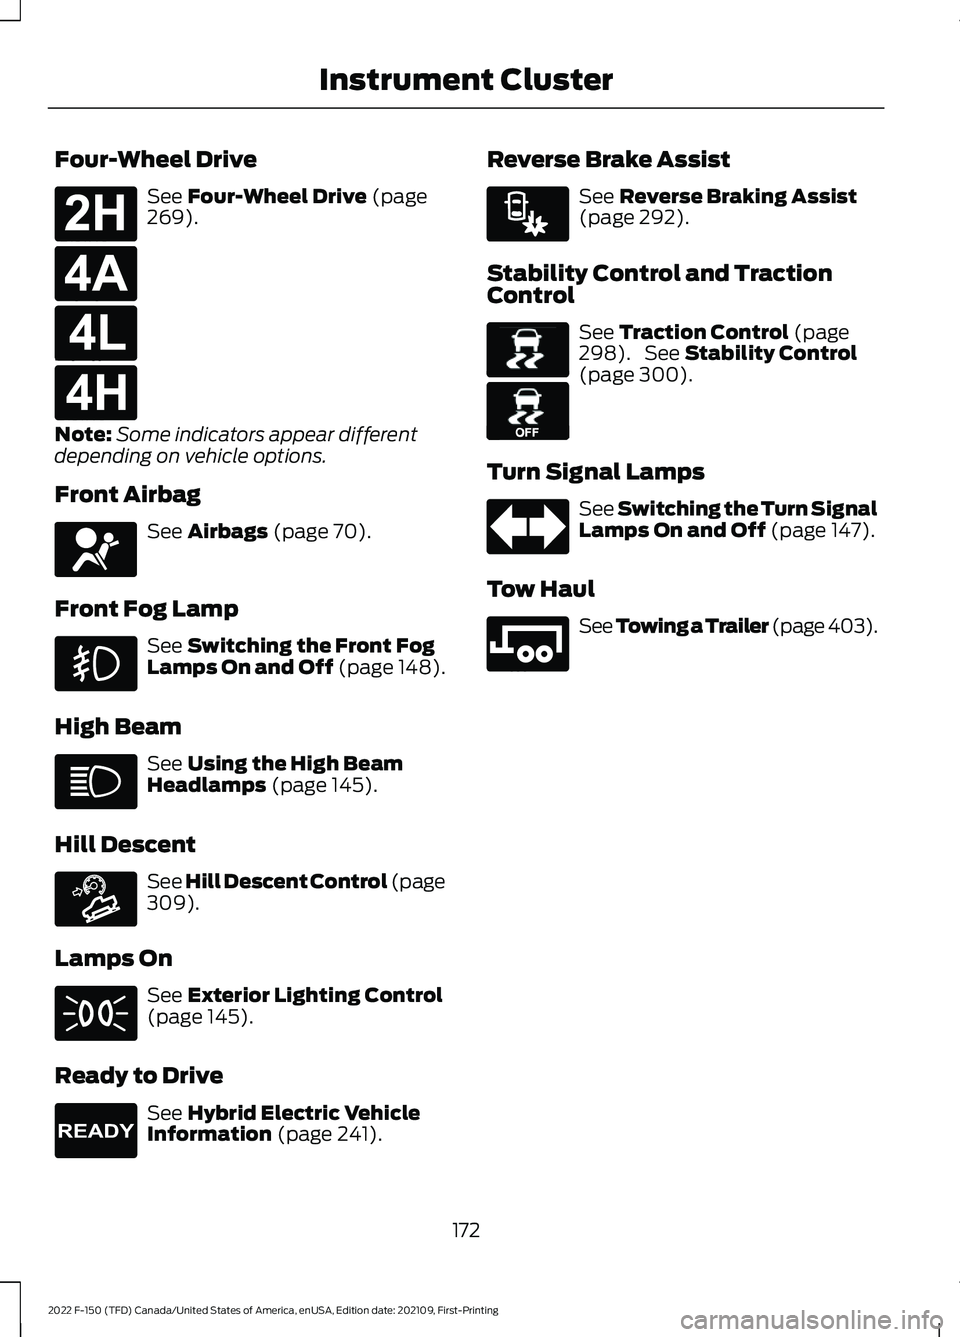 FORD F-150 2022 User Guide Four-Wheel Drive
See Four-Wheel Drive (page
269).
Note: Some indicators appear different
depending on vehicle options.
Front Airbag See 
Airbags (page 70).
Front Fog Lamp See 
Switching the Front Fog
